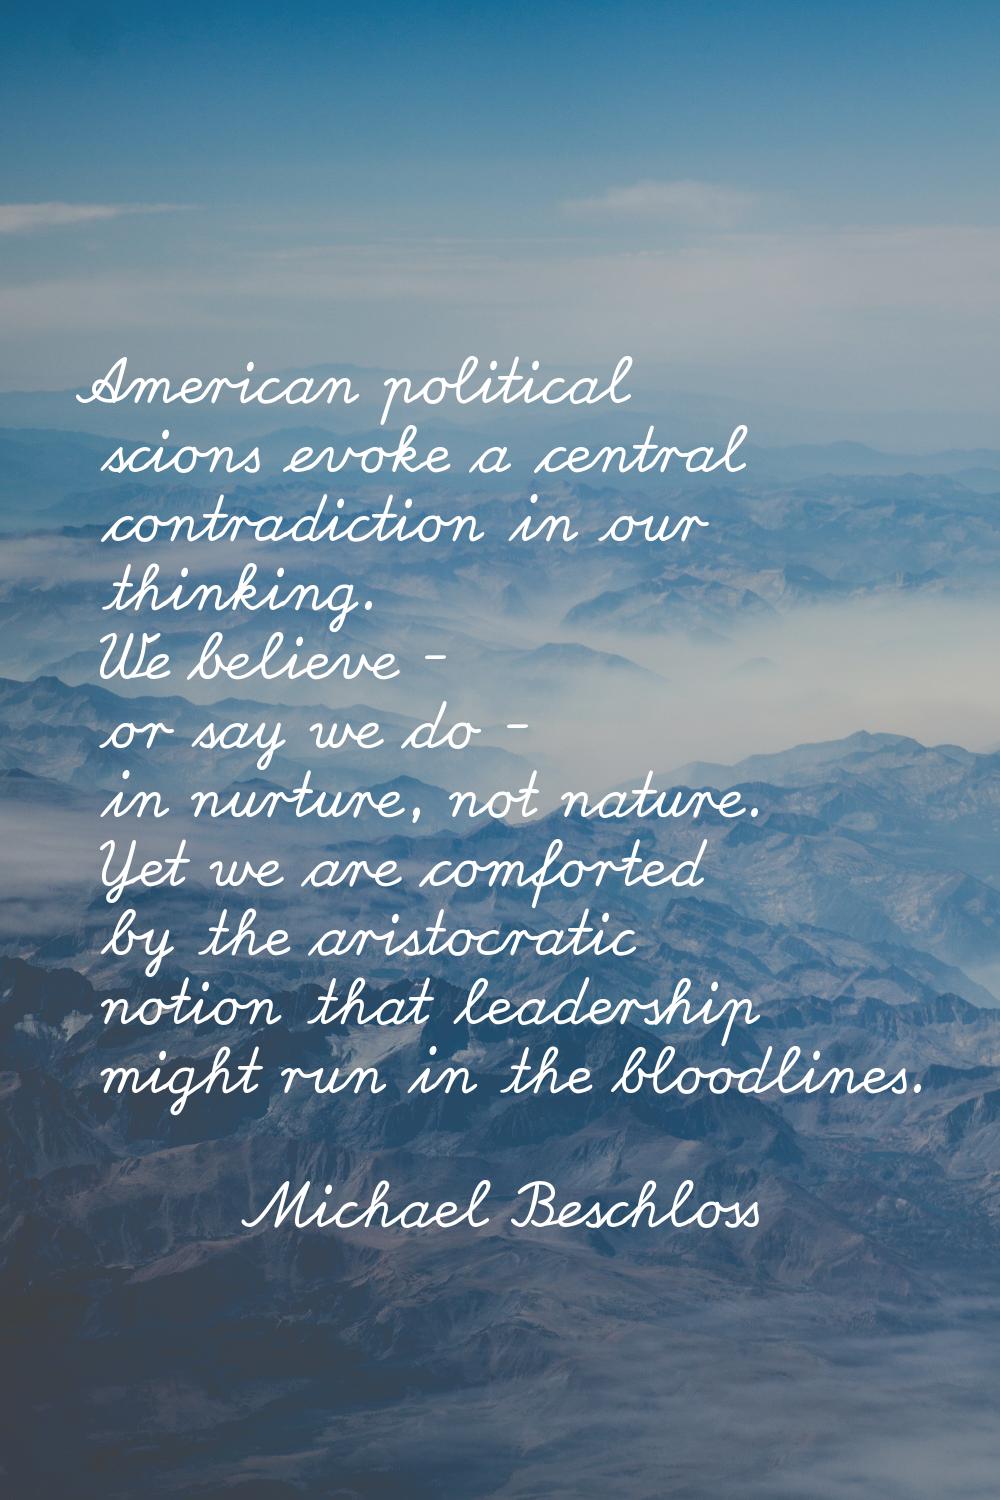 American political scions evoke a central contradiction in our thinking. We believe - or say we do 